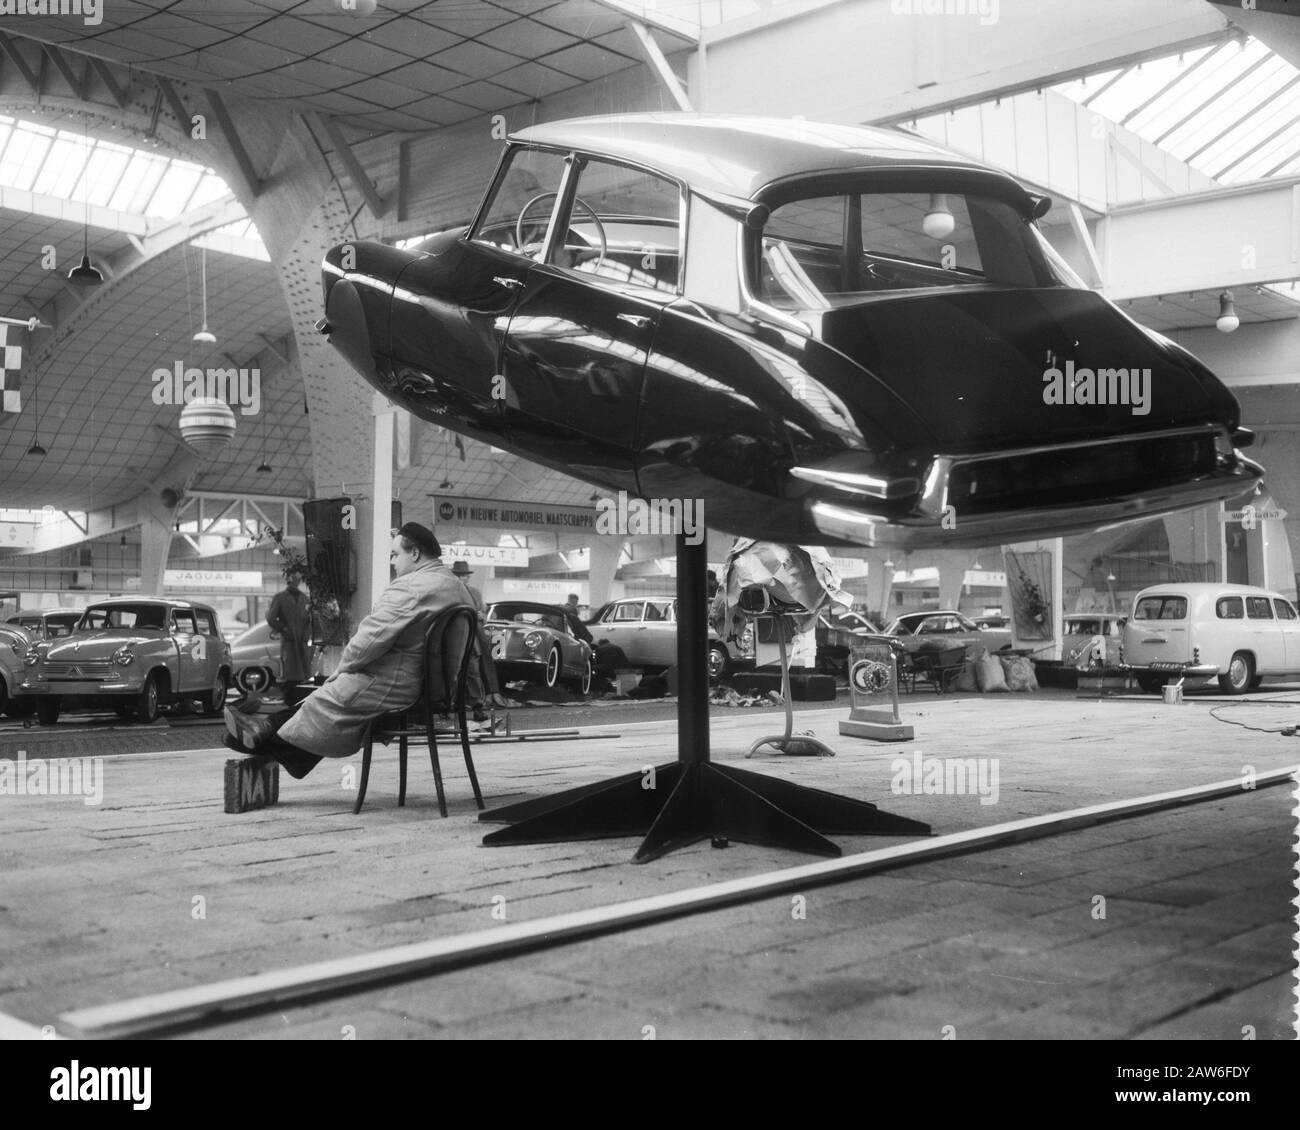 Structure of the car exhibition in the RAI. Citroen DS19 Date: February 11, 1958 Location: Amsterdam, Noord-Holland Keywords: car exhibits Institution Name: RAI Stock Photo